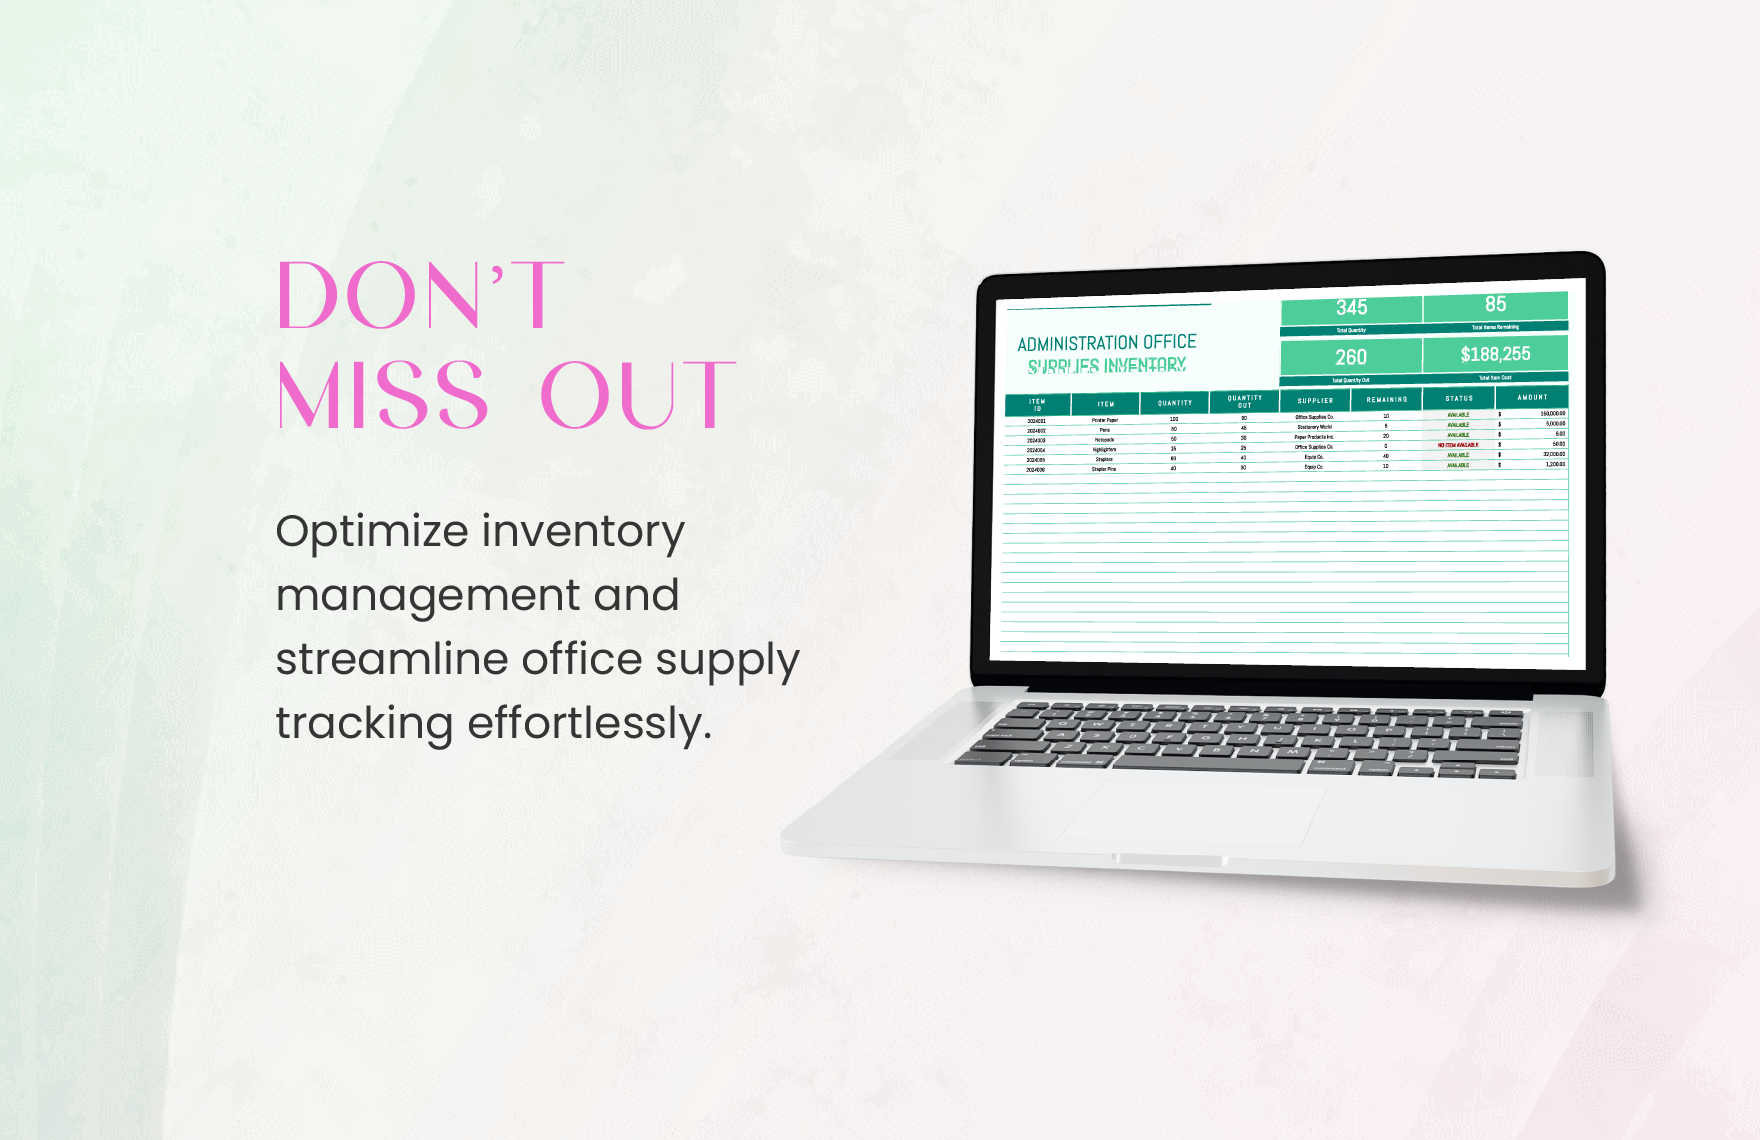 Administration Office Supplies Inventory Template